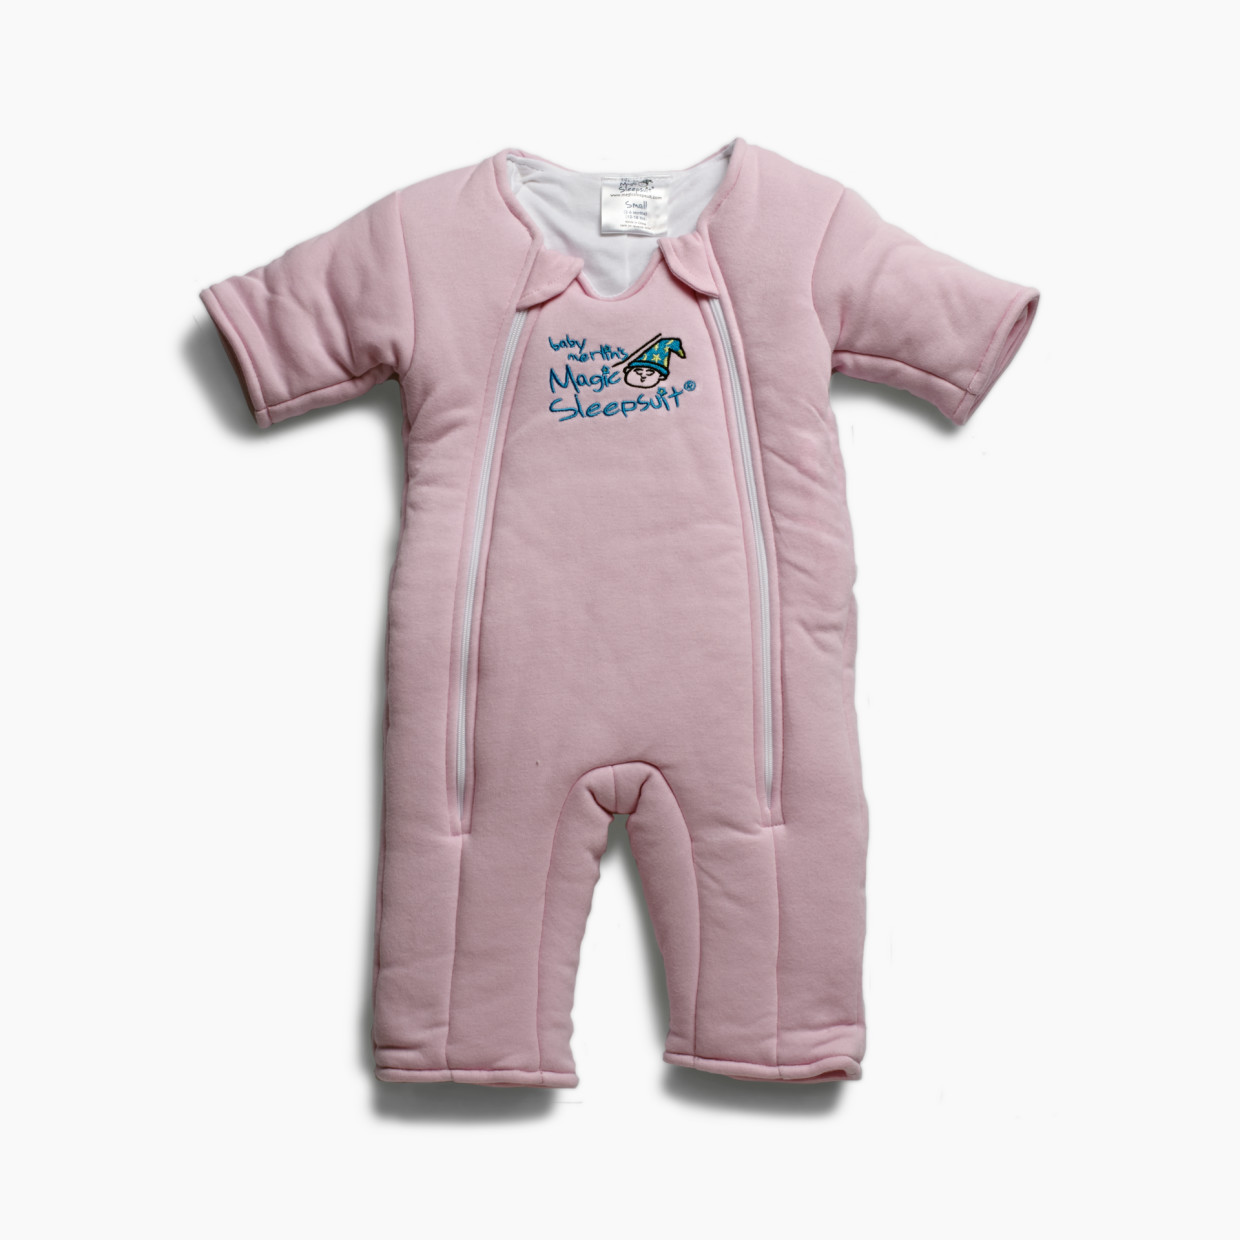 Baby Merlin's Magic Sleepsuit Cotton Swaddle Transition Product - Pink, 3-6 Months.